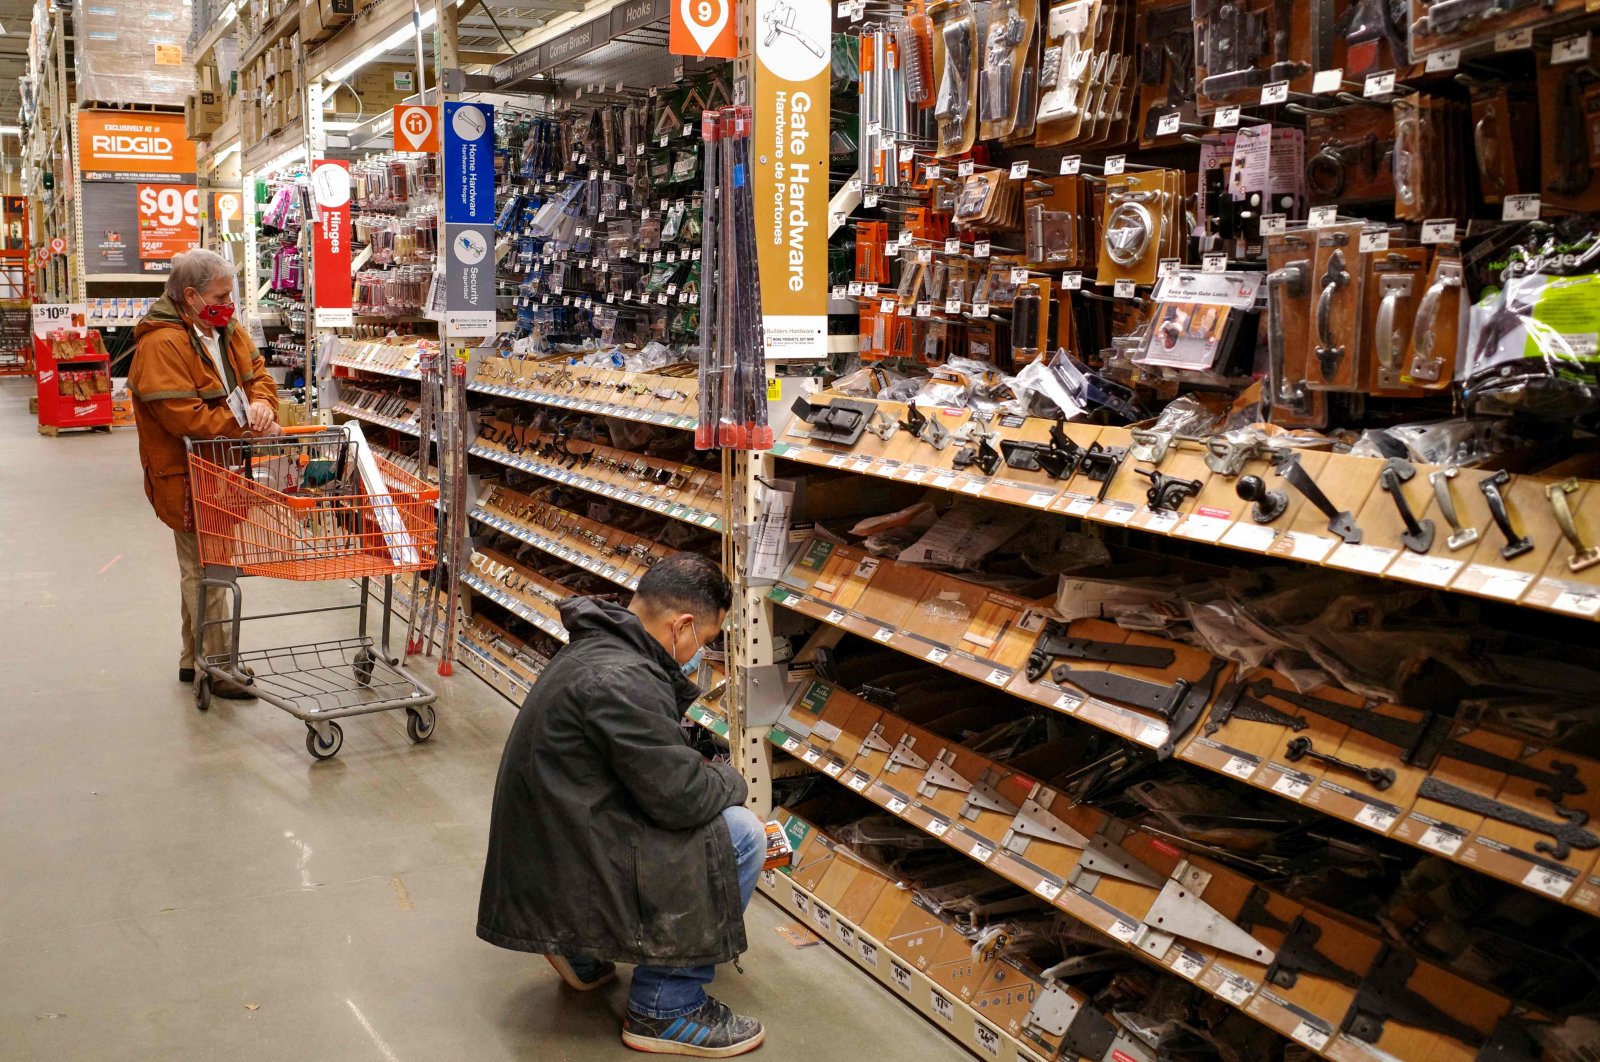 Shoppers looks at items on shelves at a home improvement store in Bethesda, Maryland, U.S., Feb. 17, 2022. (AFP Photo)